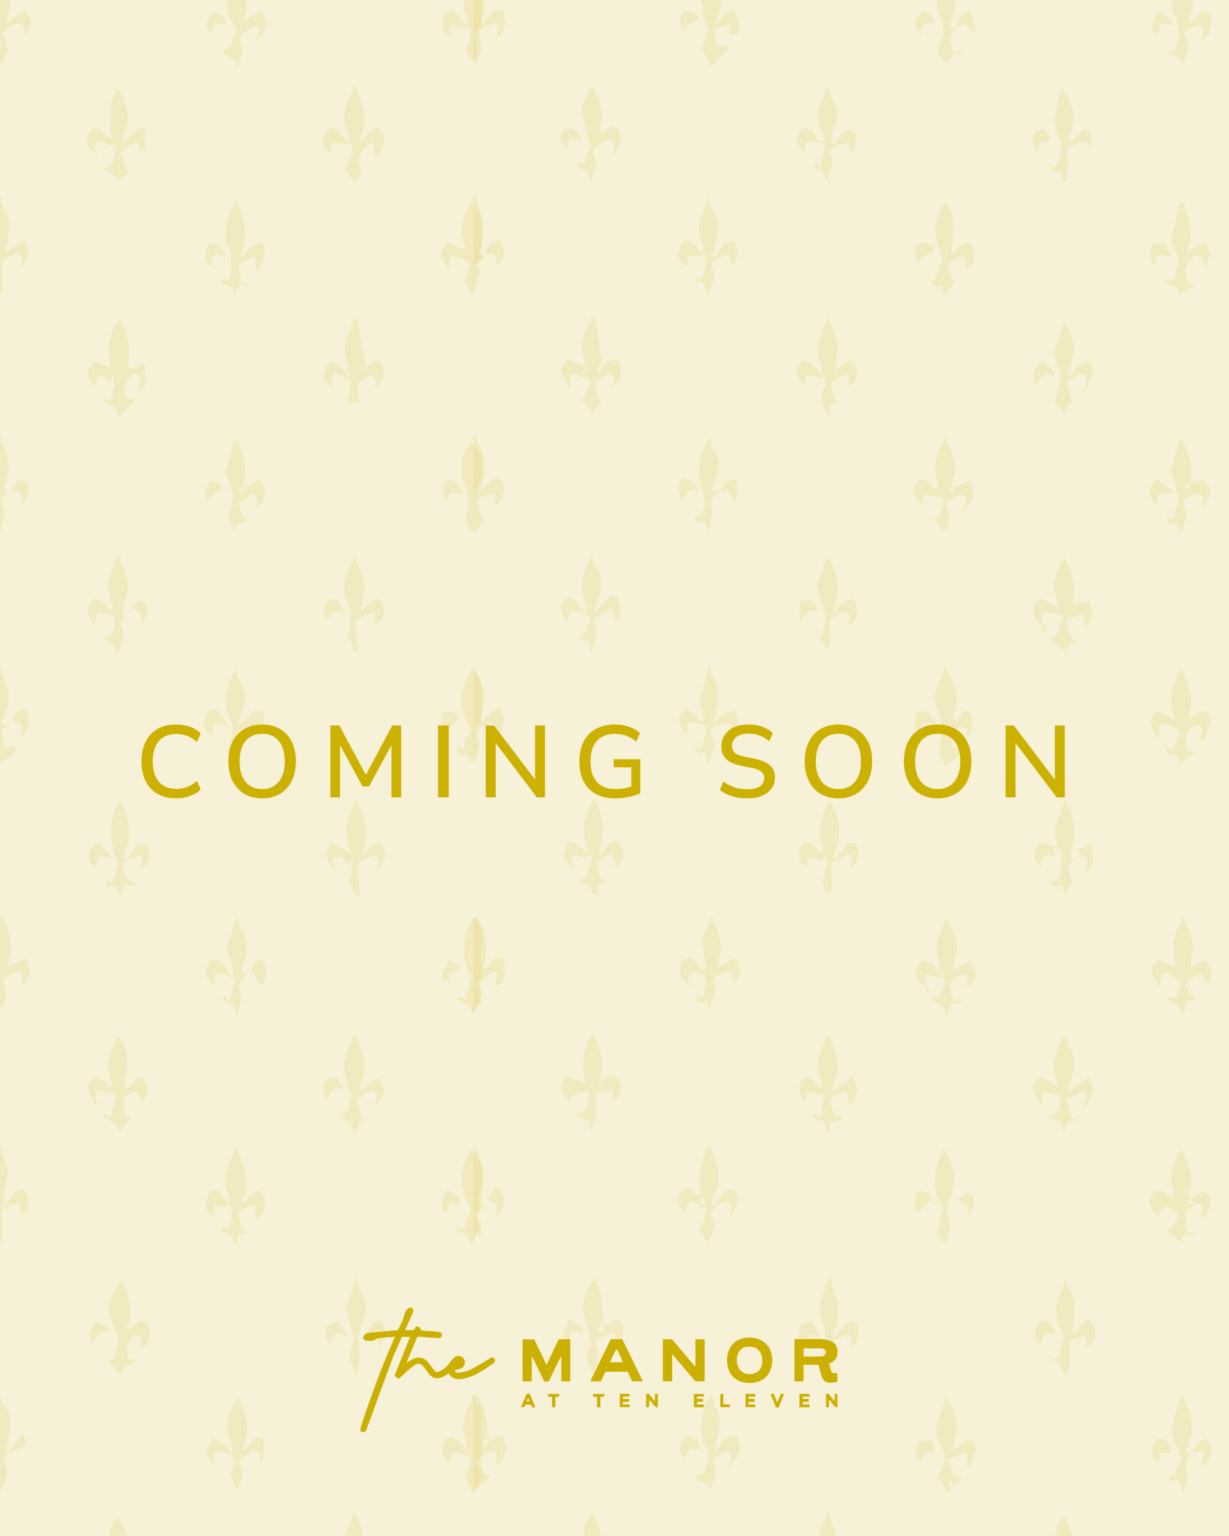 Coming Soon - The Manor-2